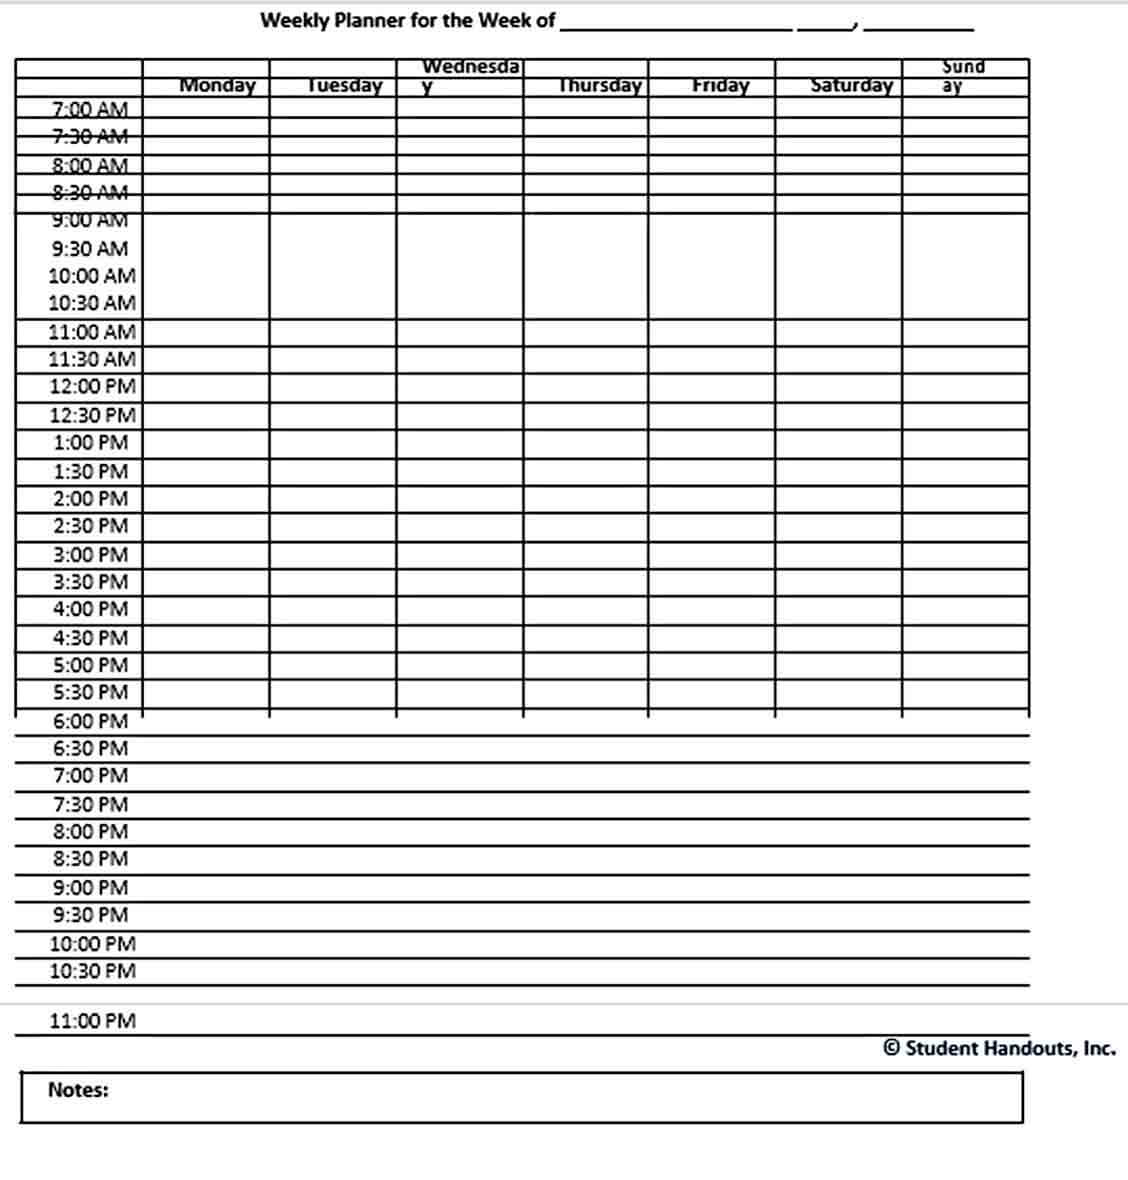 Weekly Hourly Planner Schedule Template Free Download PDF